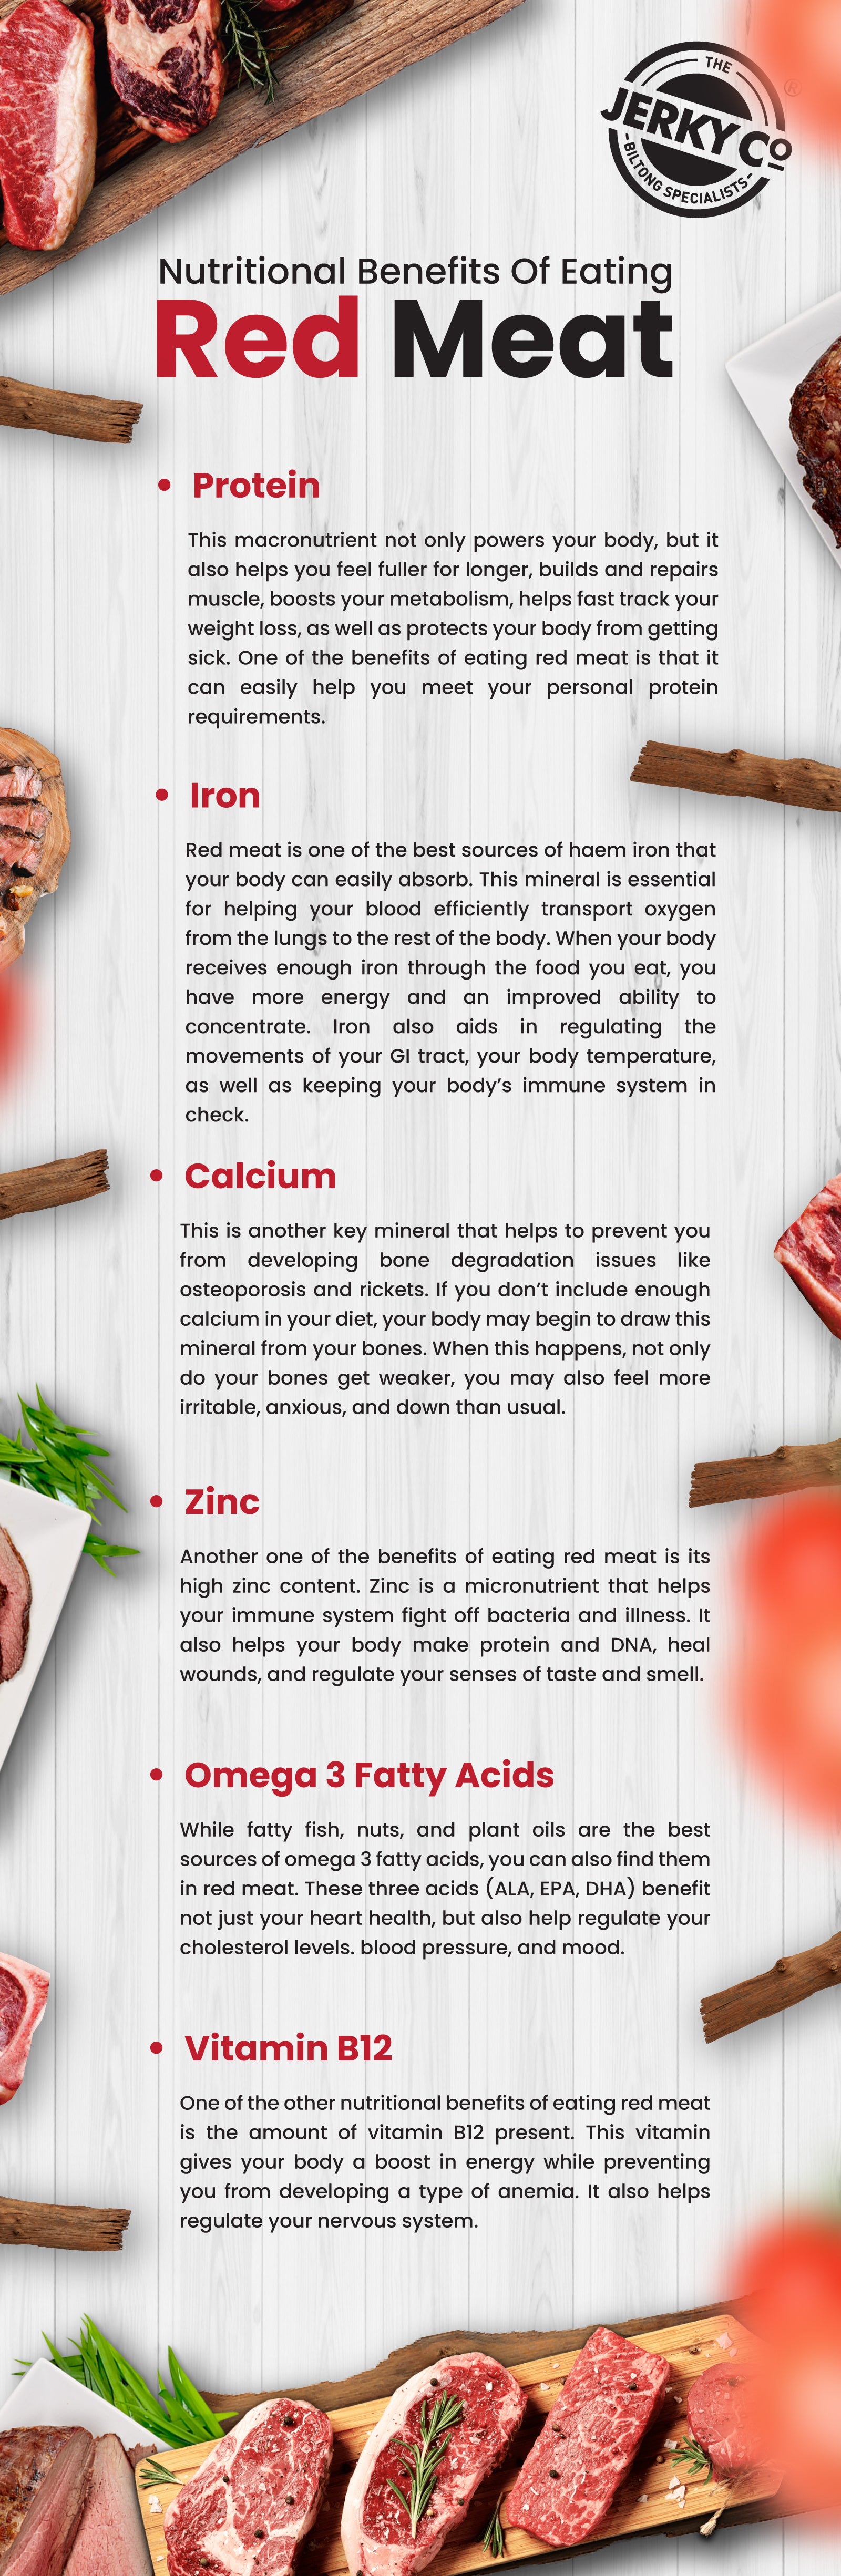 Nutritional Benefits of Red - Infographic | The Jerky Co